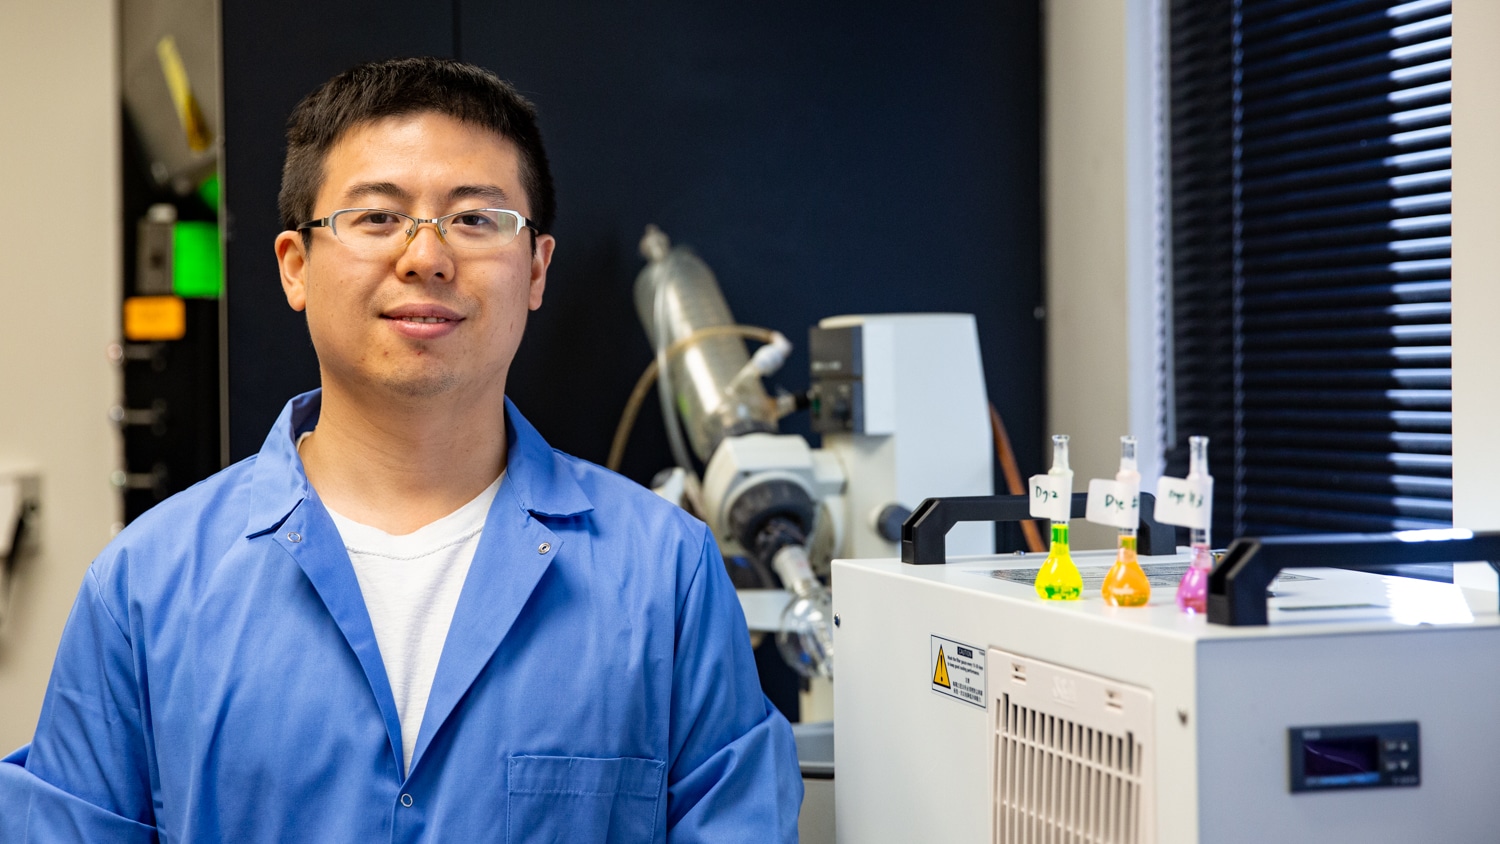 Yang Zhang poses for picture while standng in his laboratory.